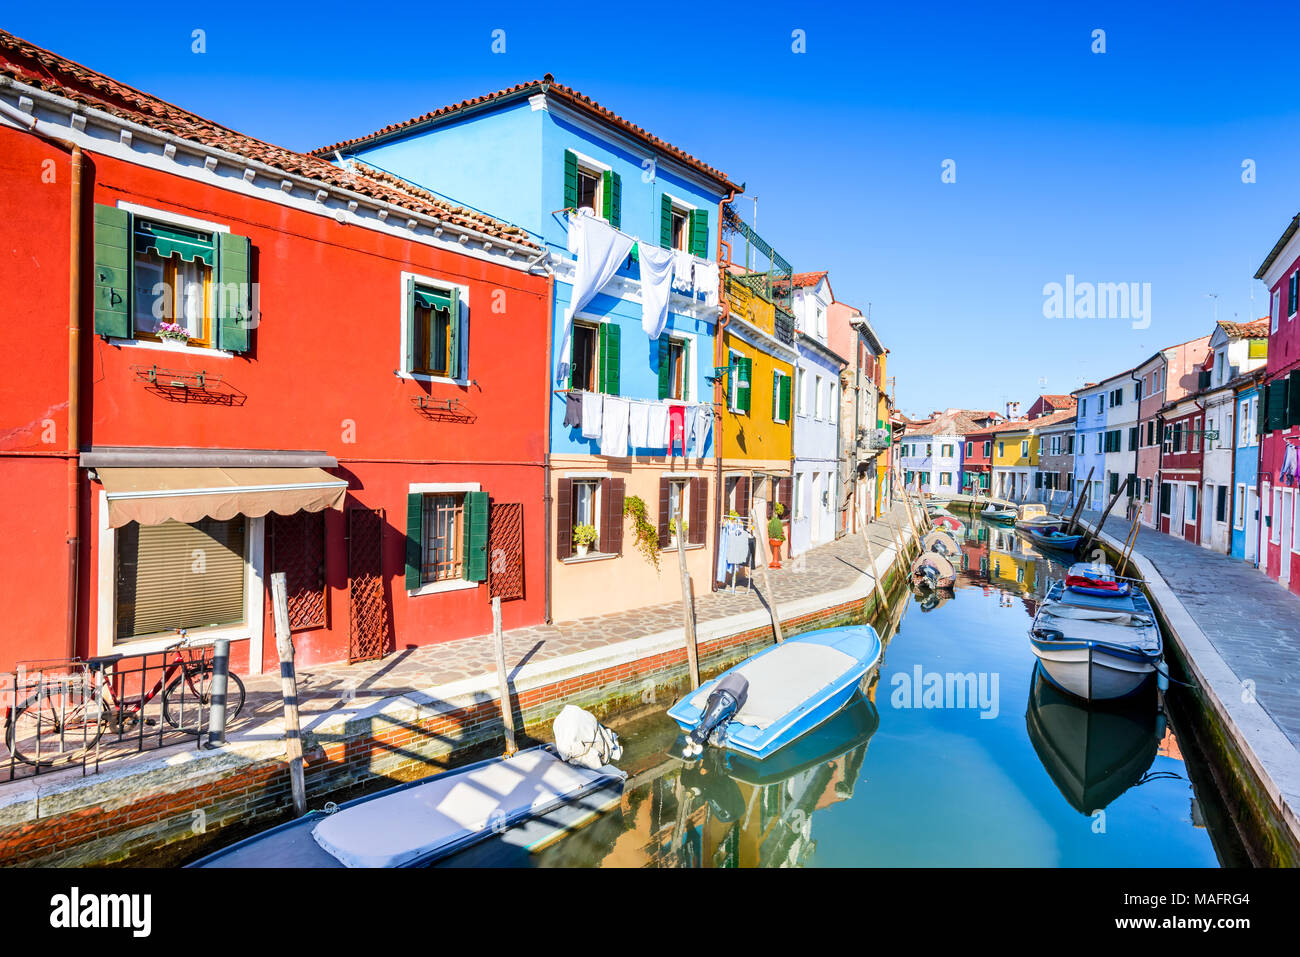 Burano, Venice. Image with colorful island and water canal from beautiful Veneto in Italy. Stock Photo